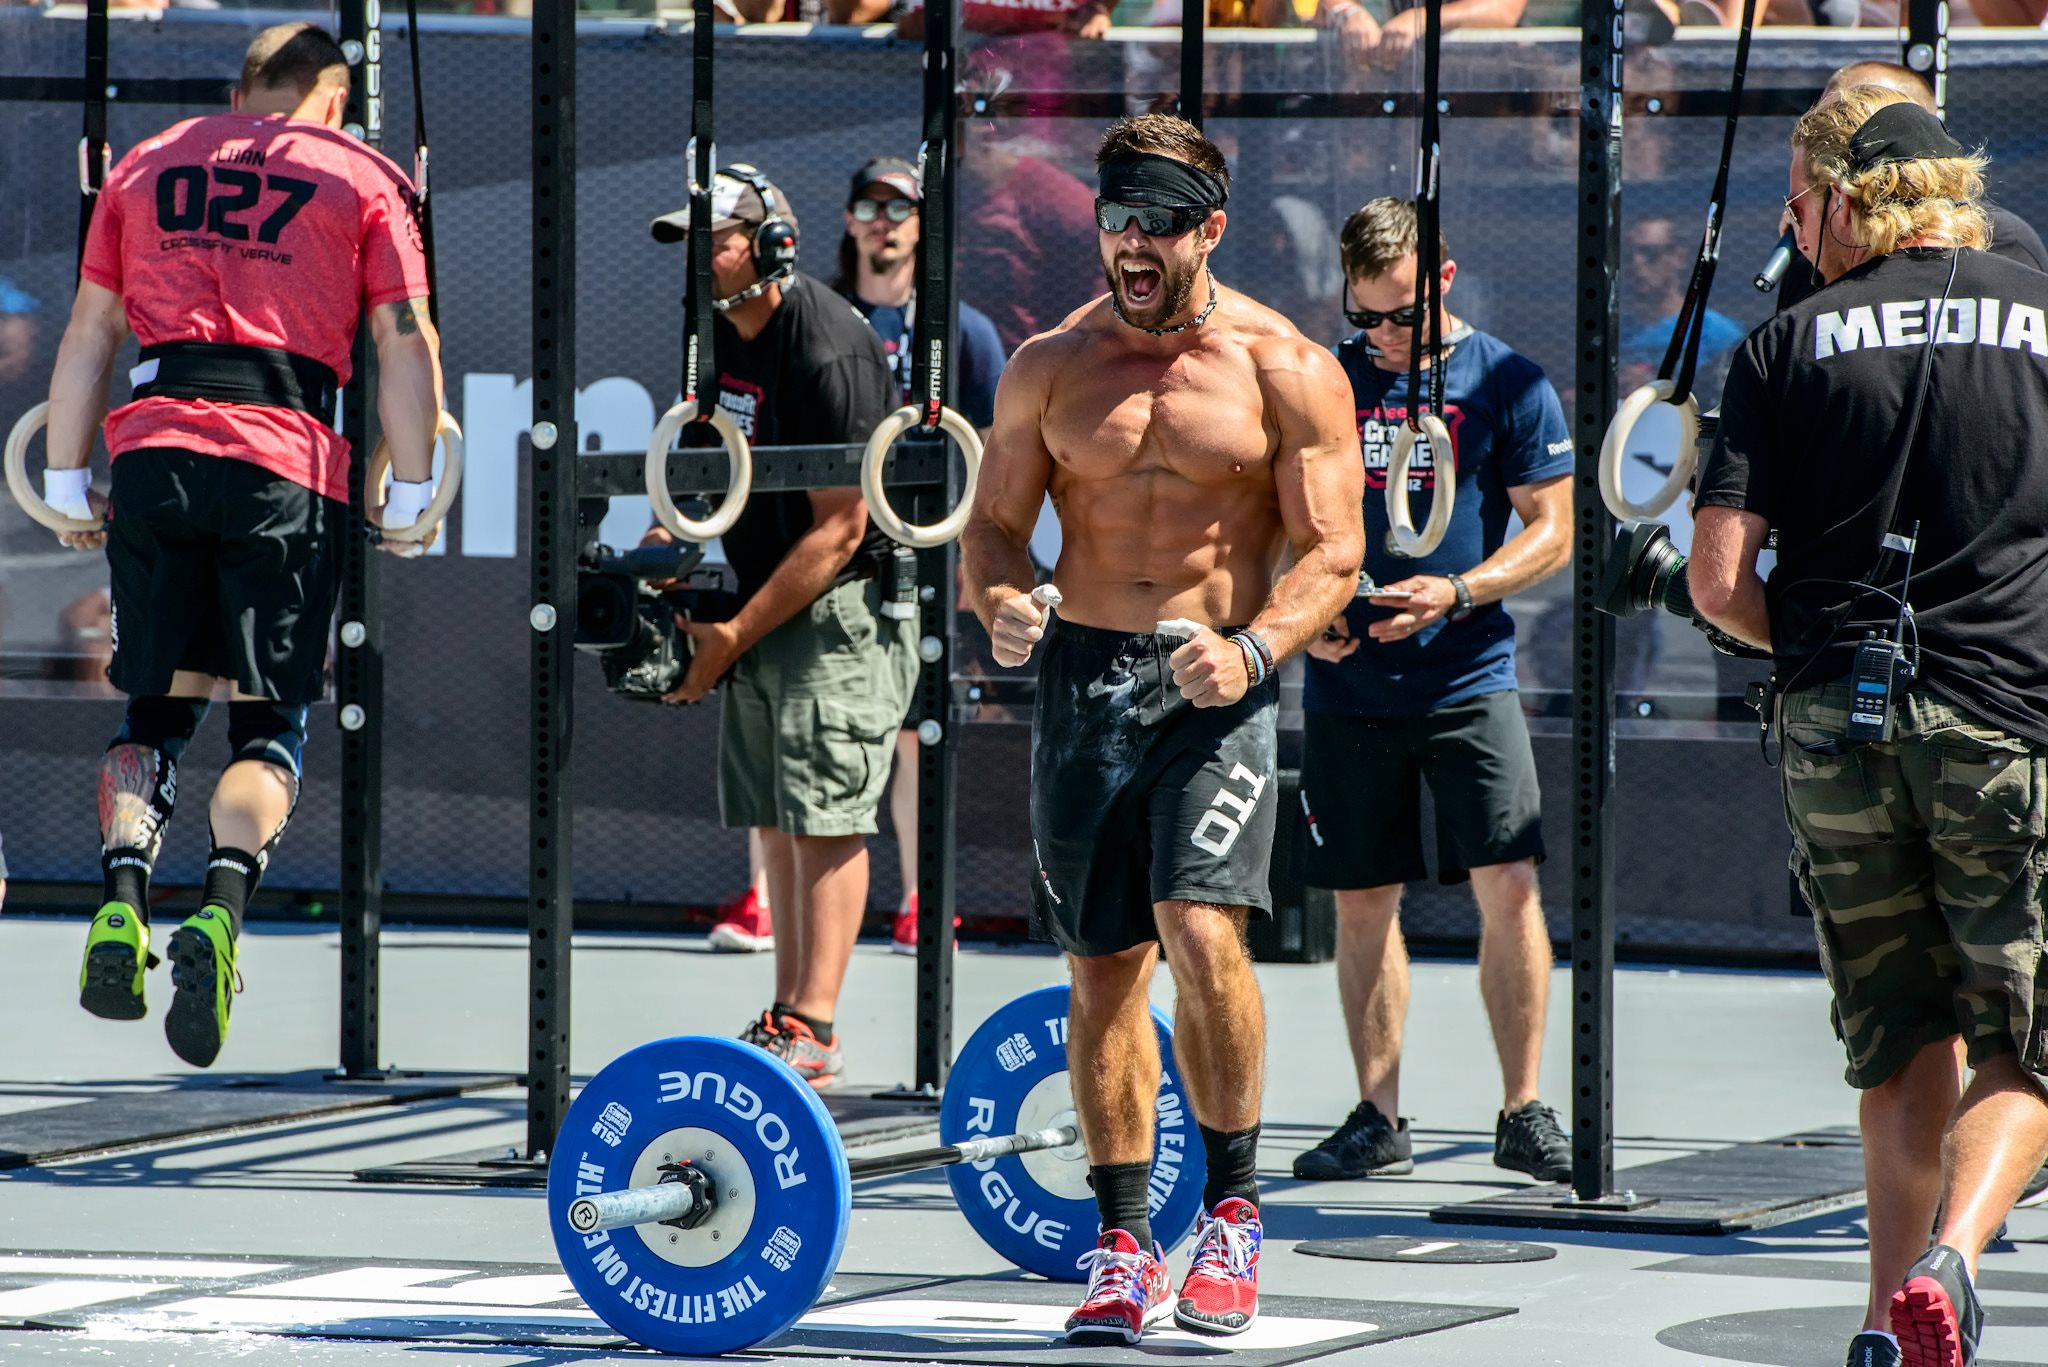 Rich Froning by Brian Sullivan / 500px